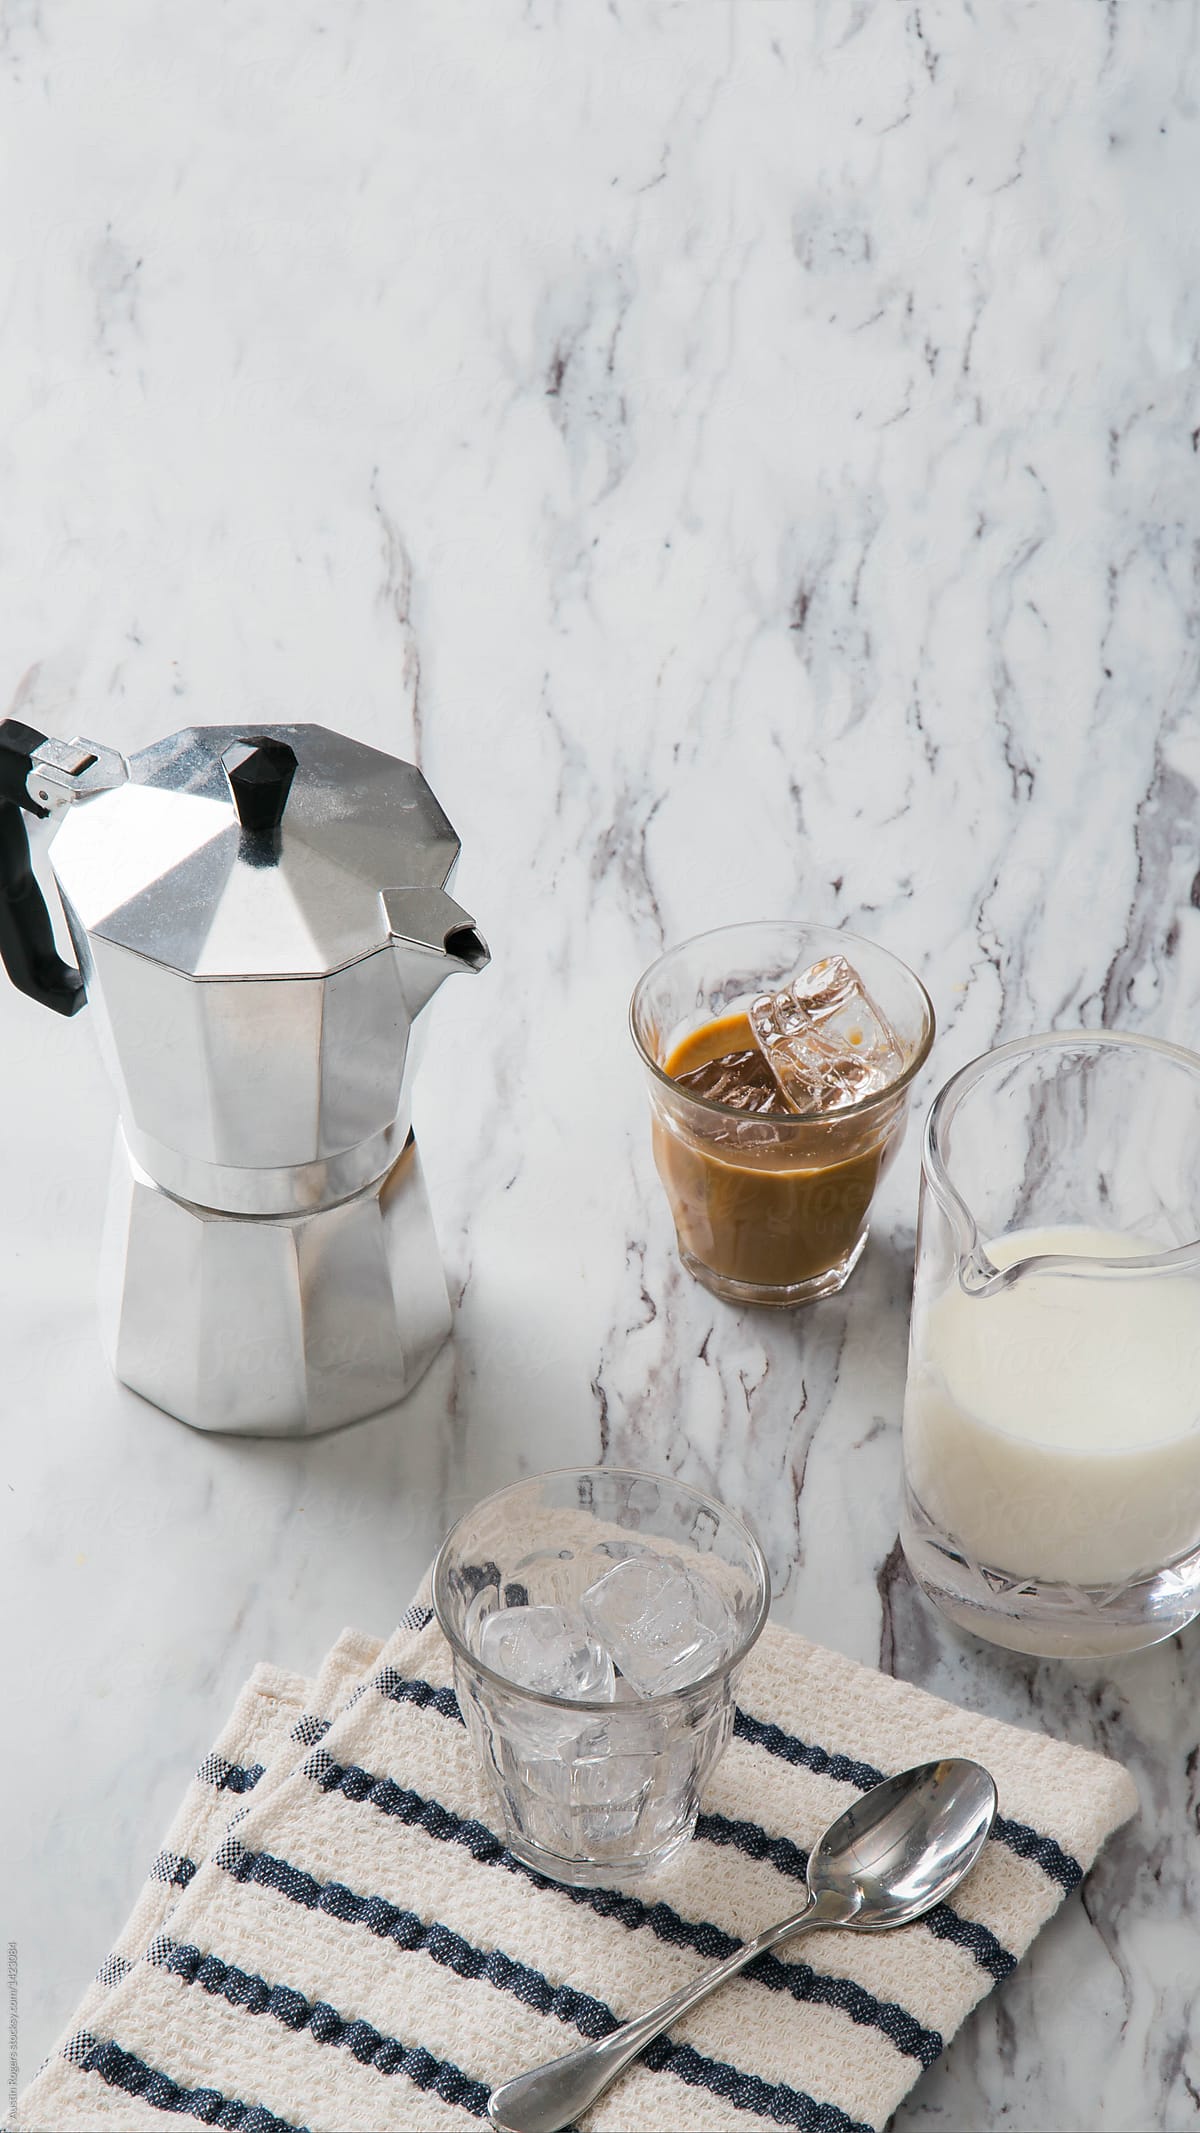 Iced Latte Setup on White Marble Countertop